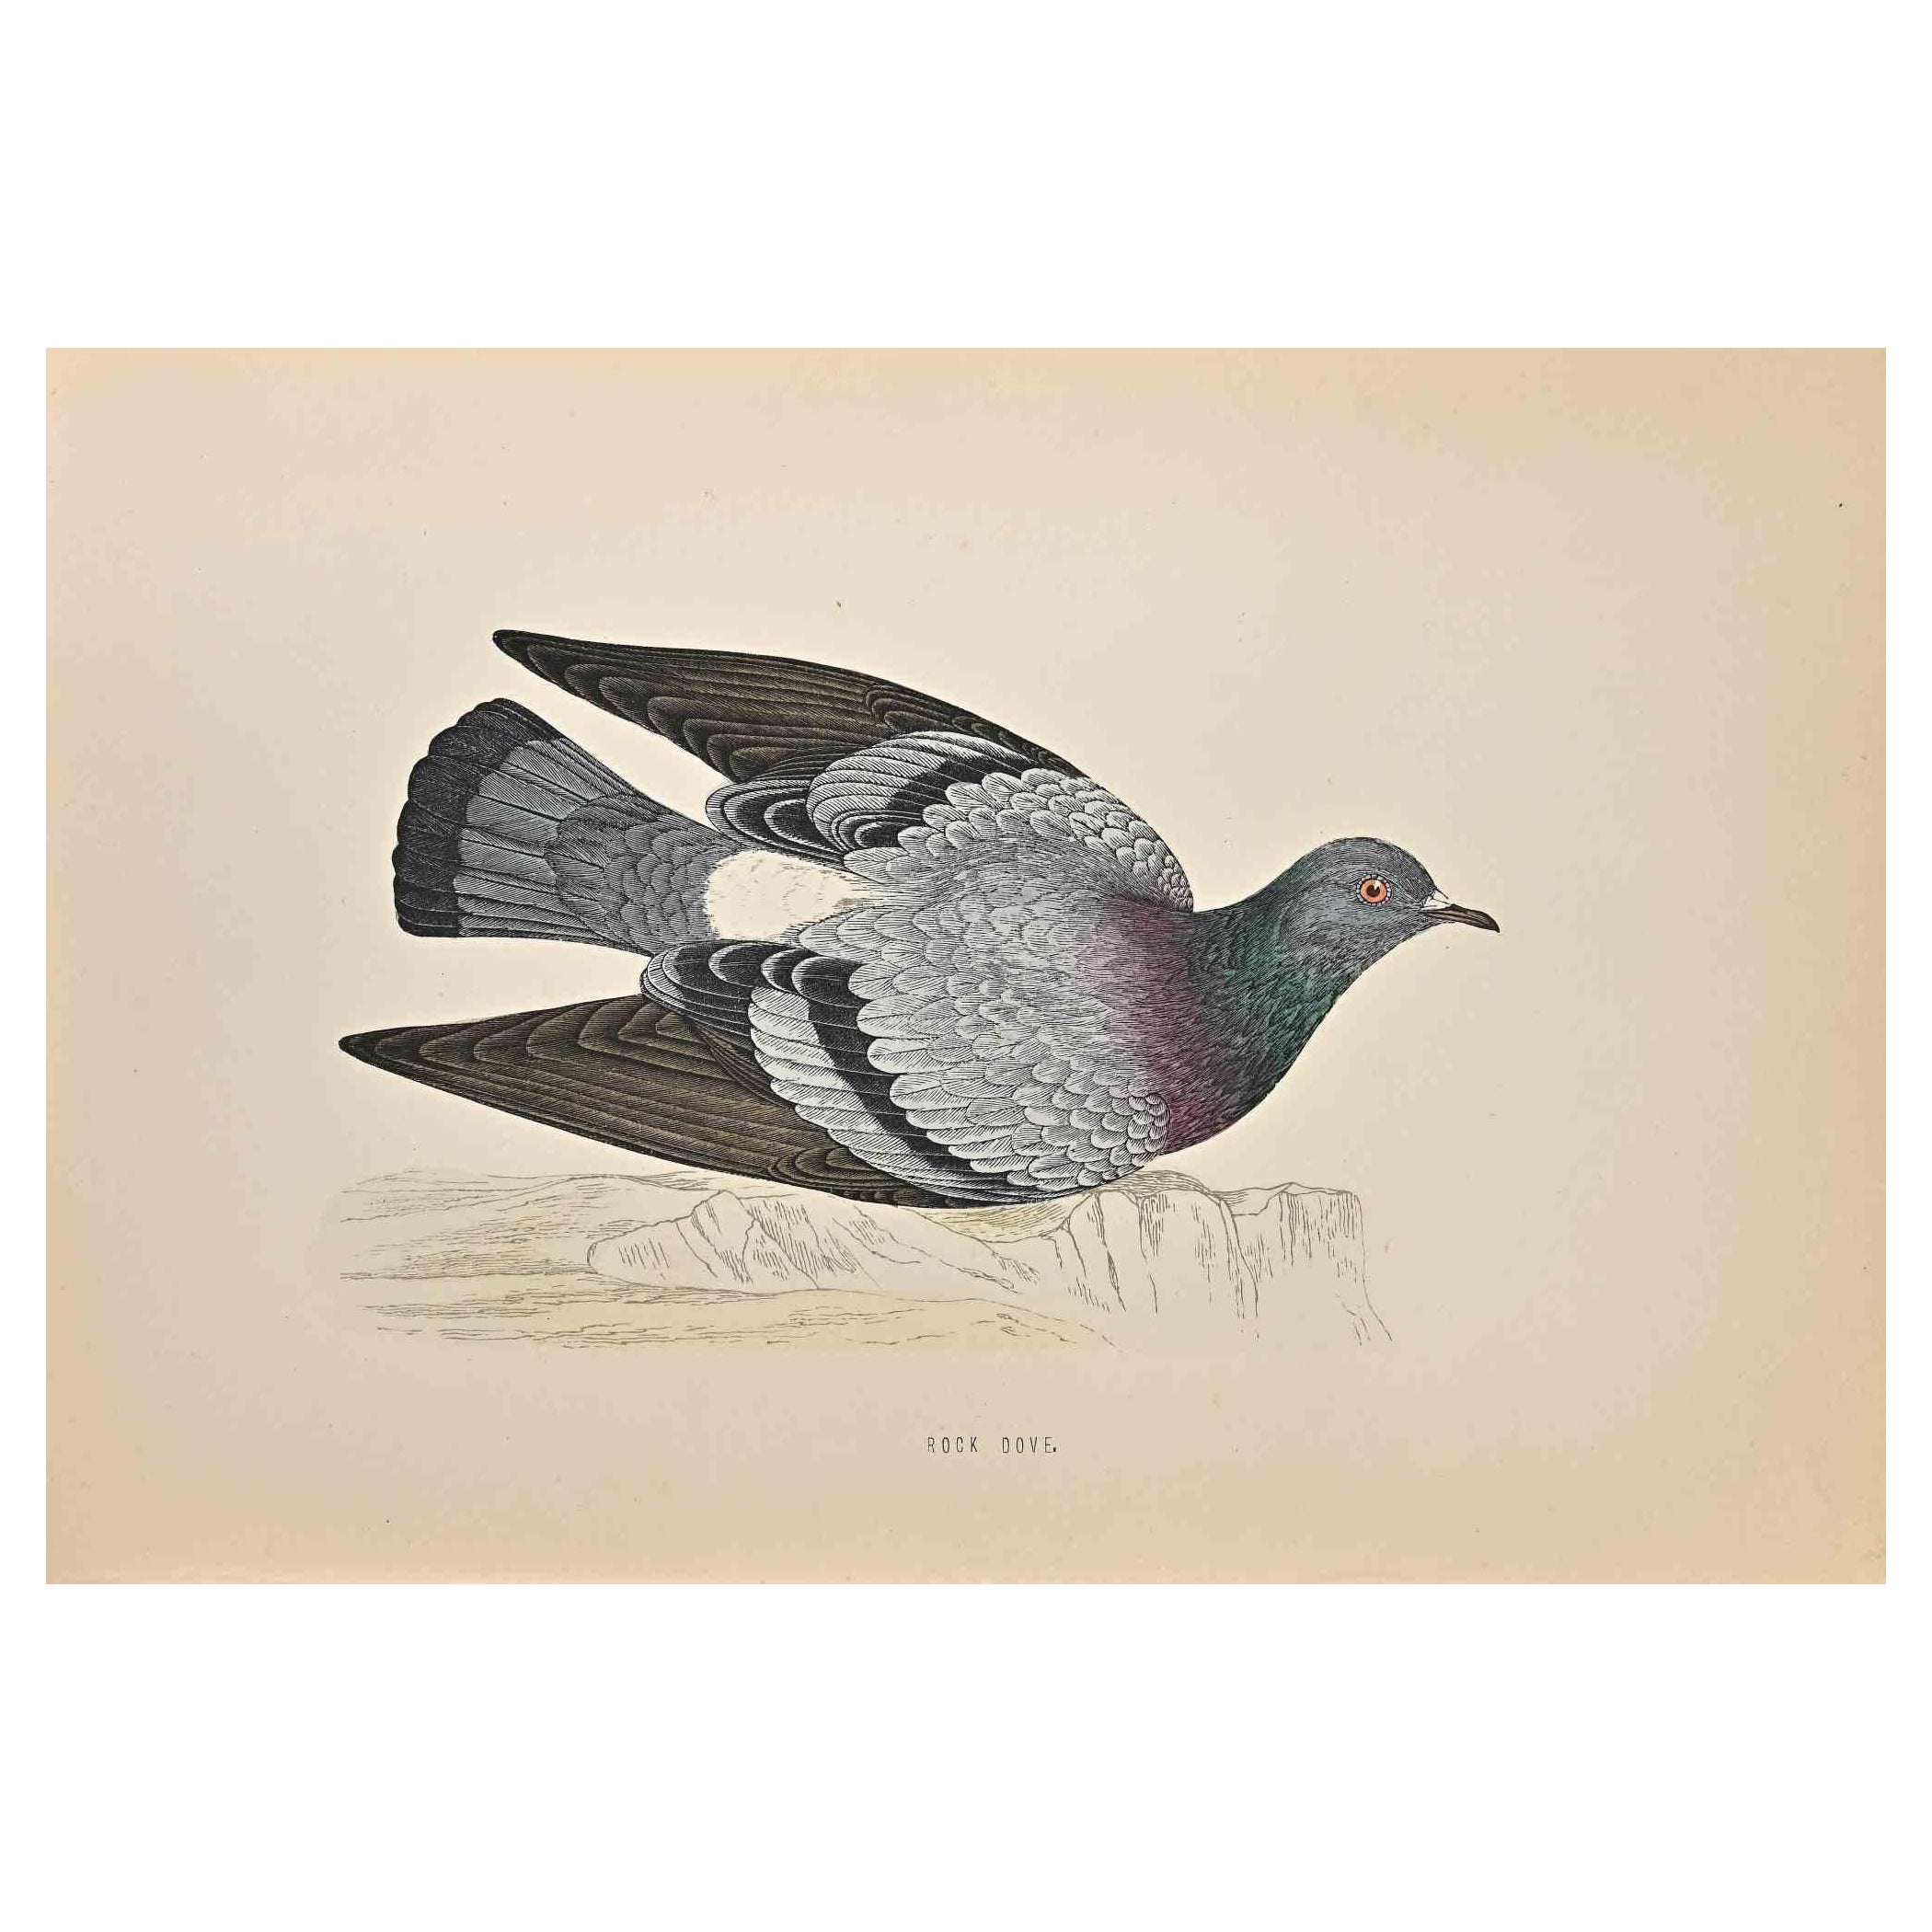 Rock Dove is a modern artwork realized in 1870 by the British artist Alexander Francis Lydon (1836-1917) . 

Woodcut print, hand colored, published by London, Bell & Sons, 1870.  Name of the bird printed in plate. This work is part of a print suite